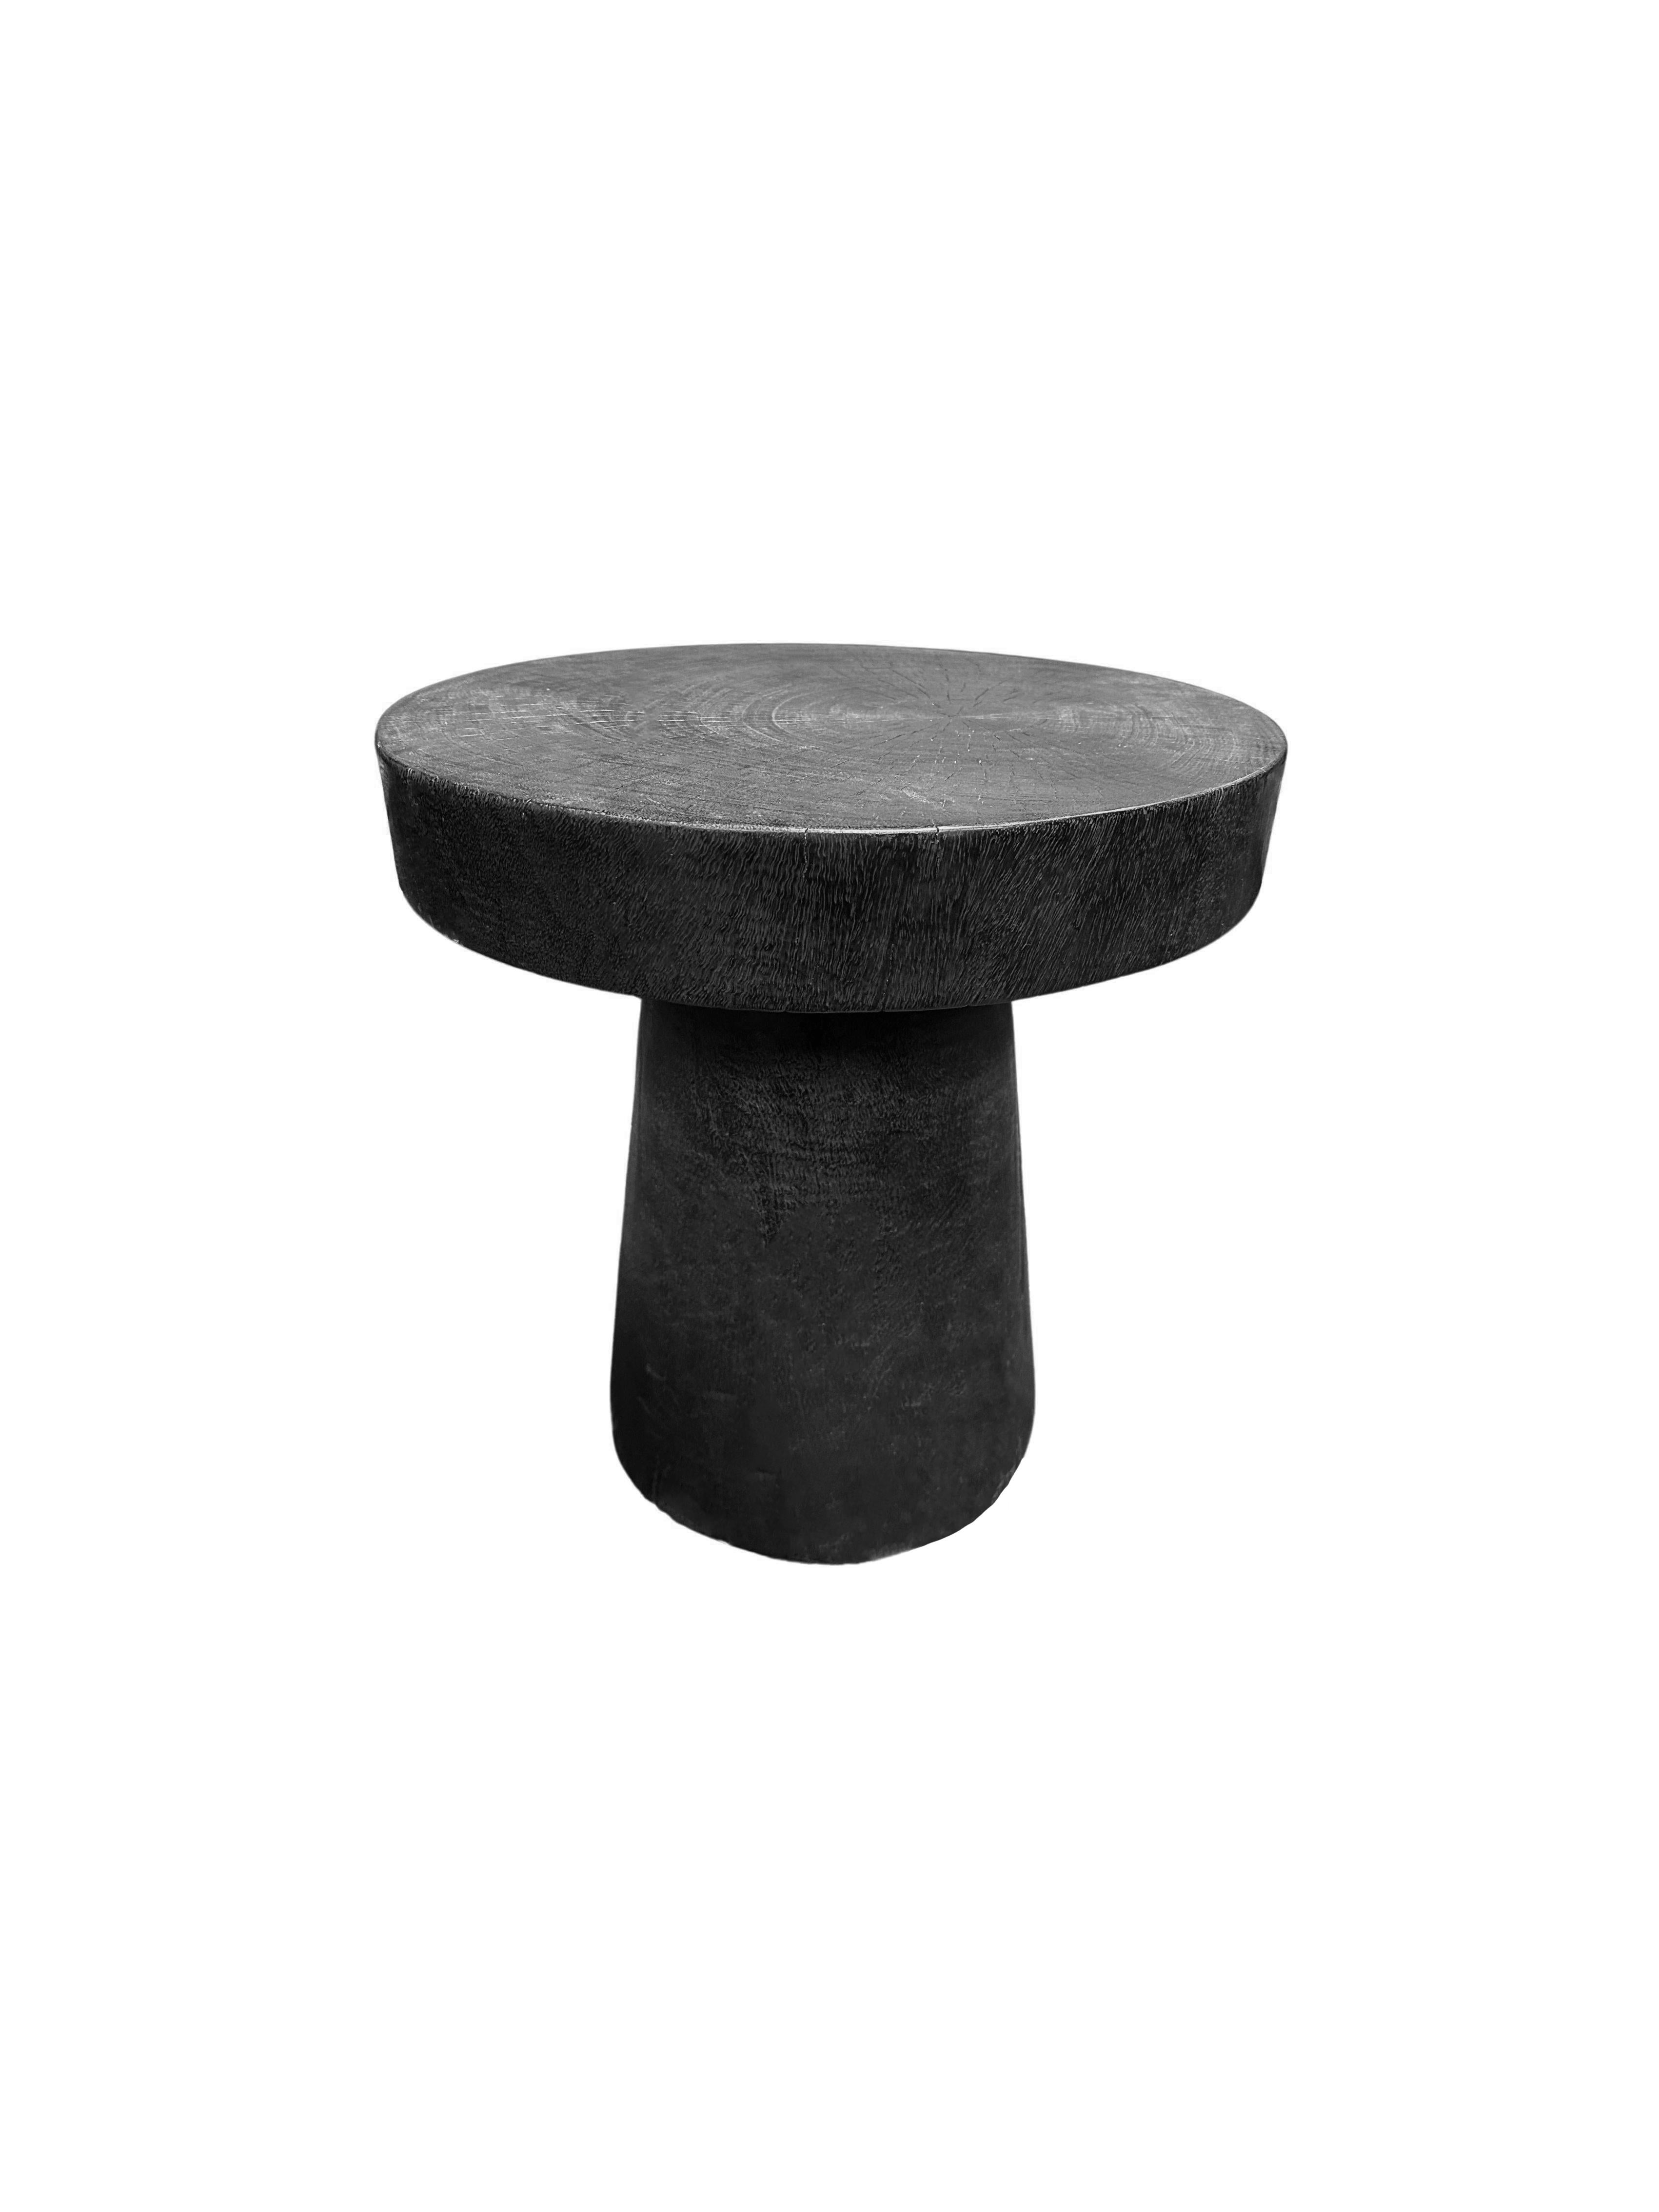 A wonderfully organic round side table. Its pigment was achieved through burning the wood multiple times and finished with a clear coat. Its neutral pigment and subtle wood texture makes it perfect for any space. This table was crafted from mango